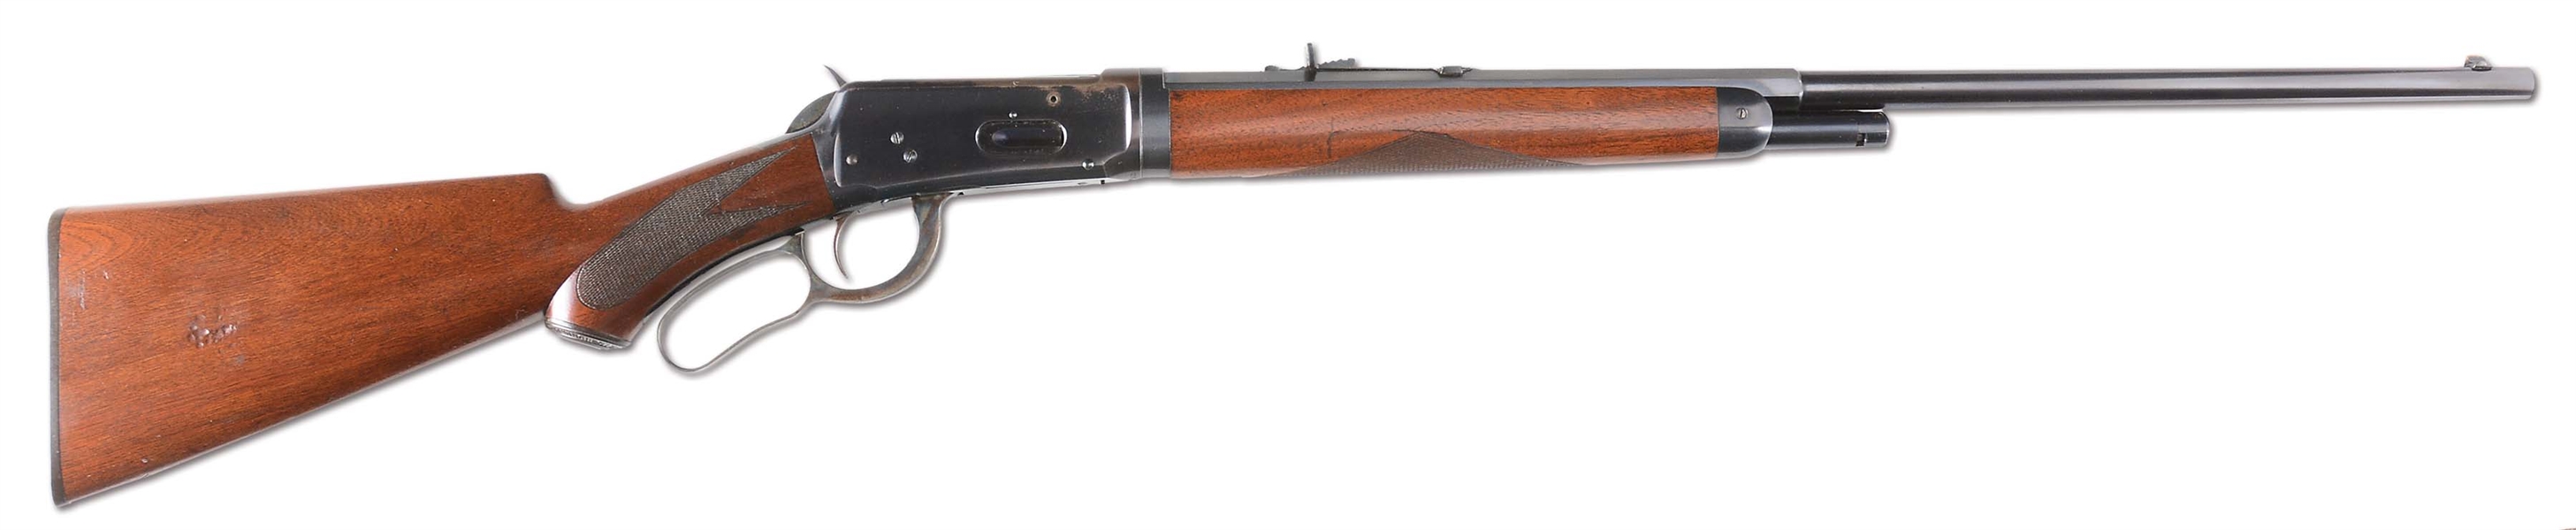 (C) HIGH CONDITION SEMI-DELUXE WINCHESTER MODEL 1894 LEVER ACTION RIFLE (1905).